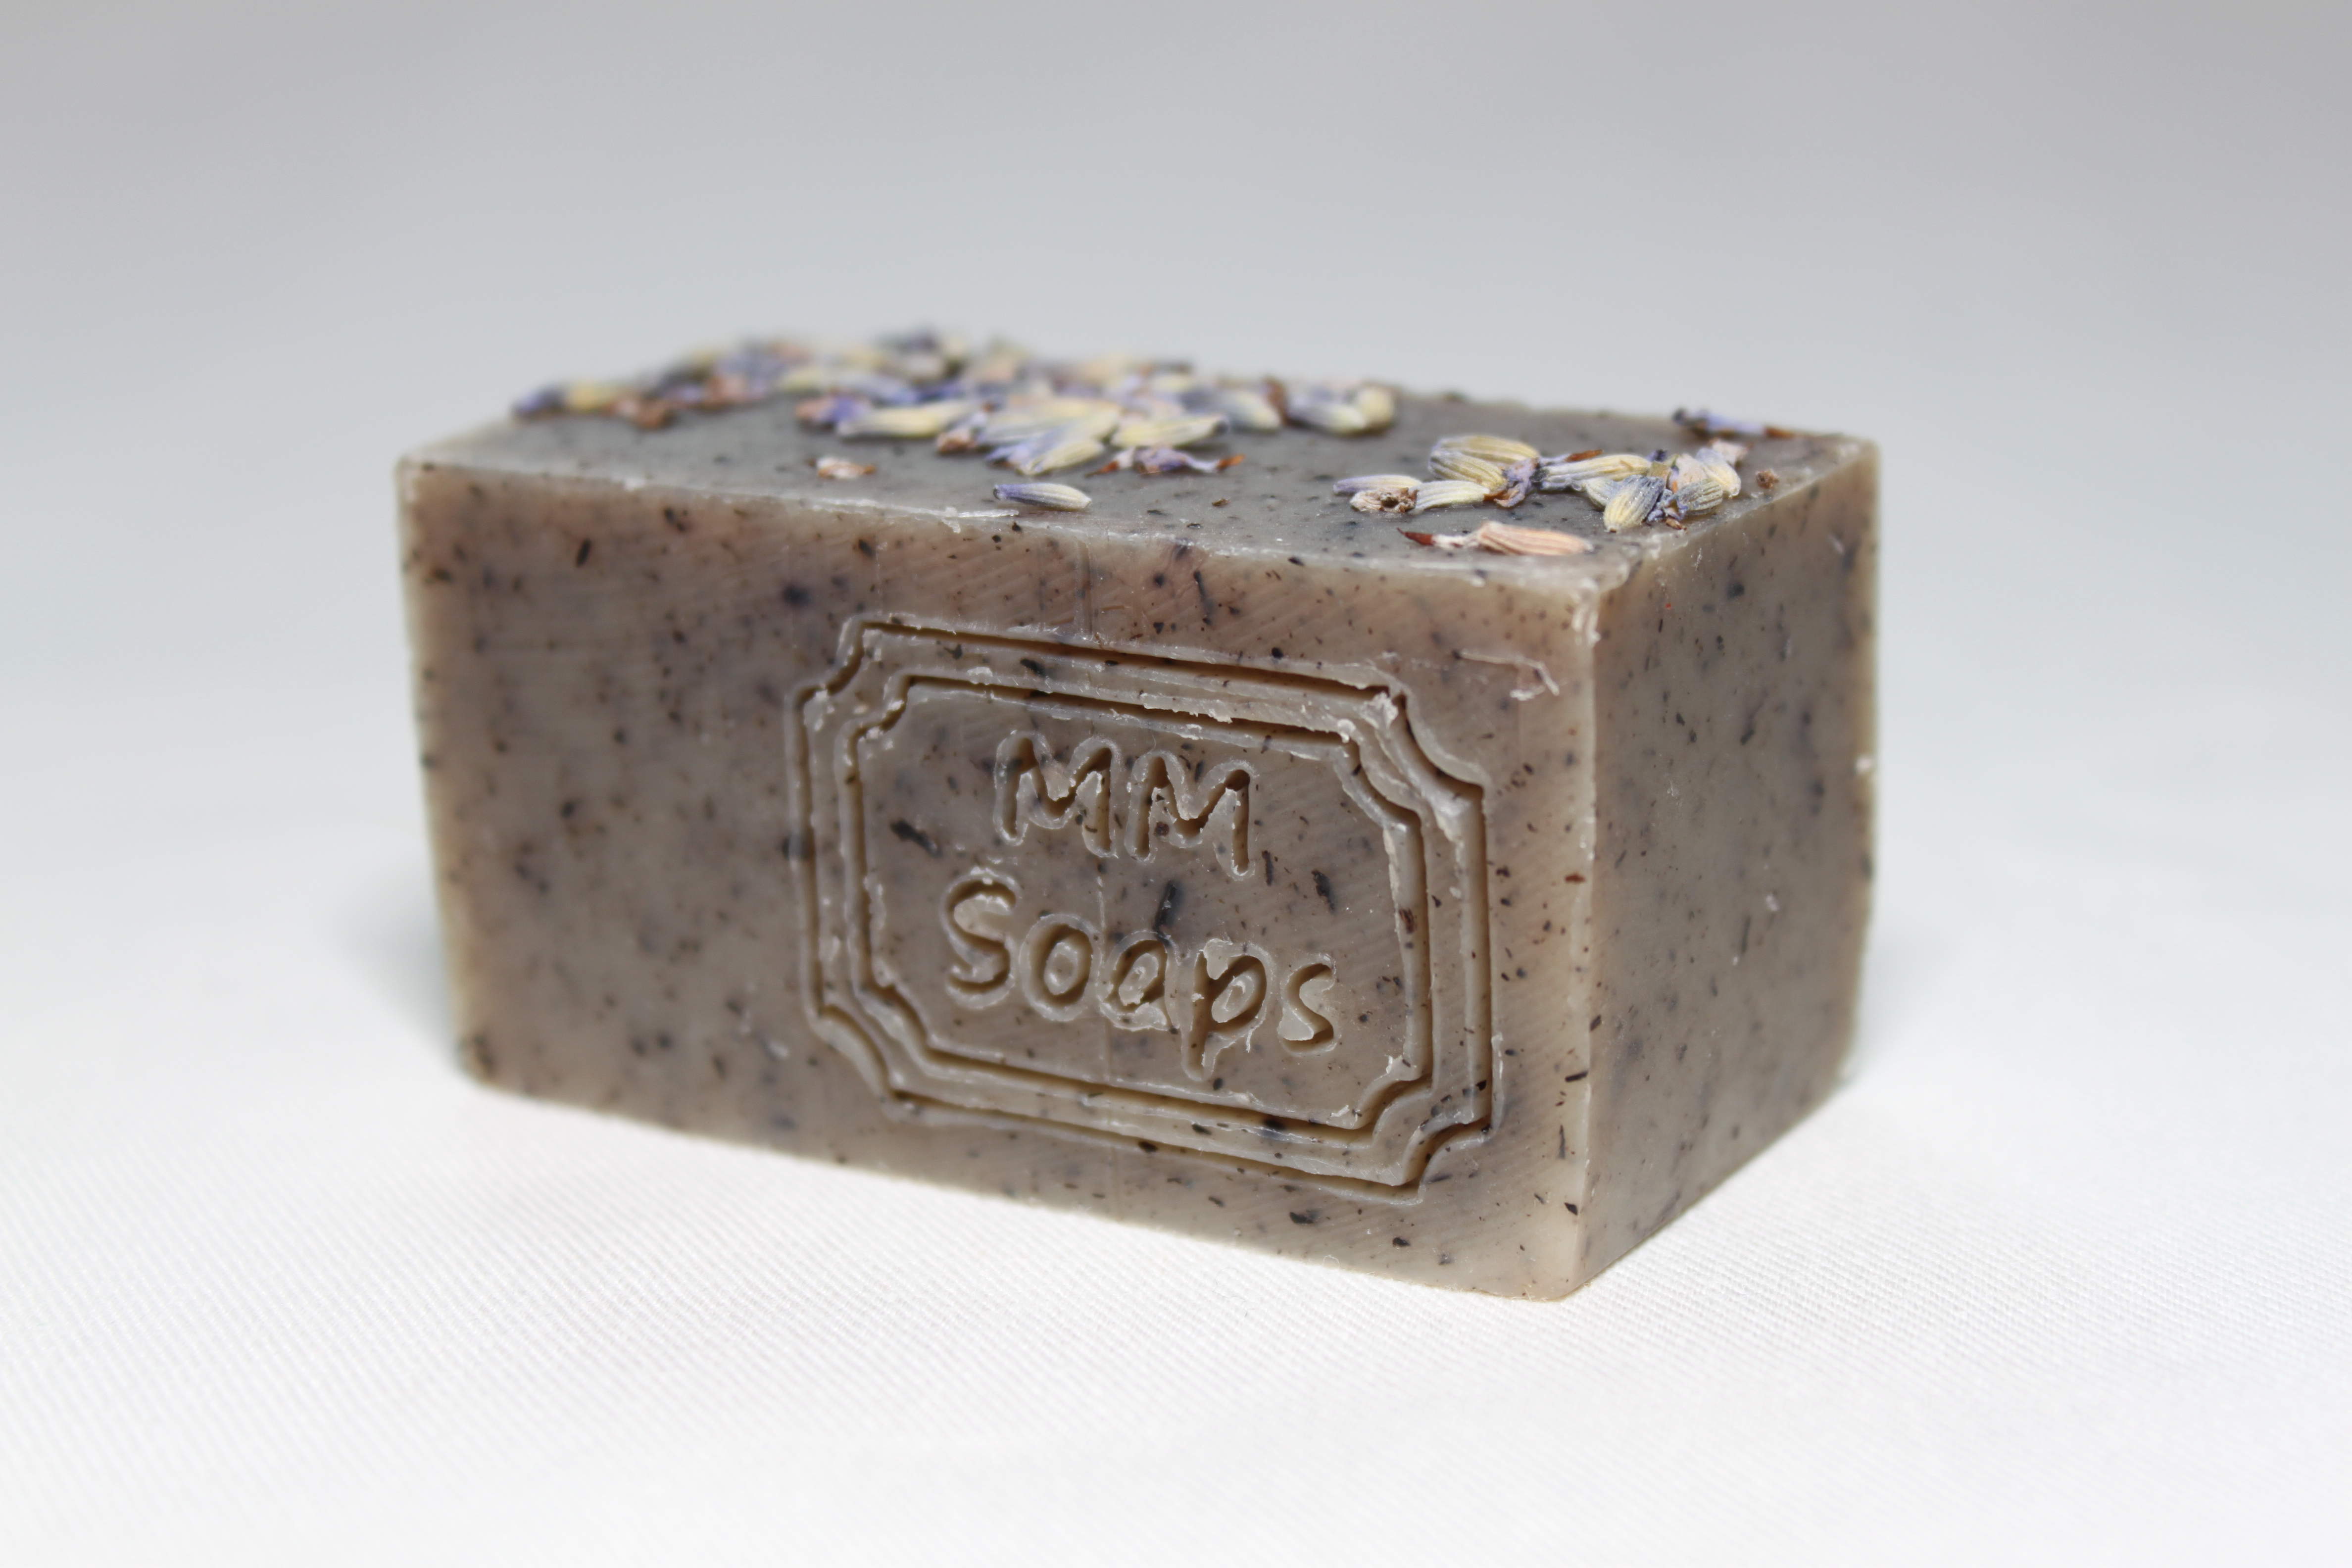 Lavender, Peppermint, and Alkanet Root Soap.